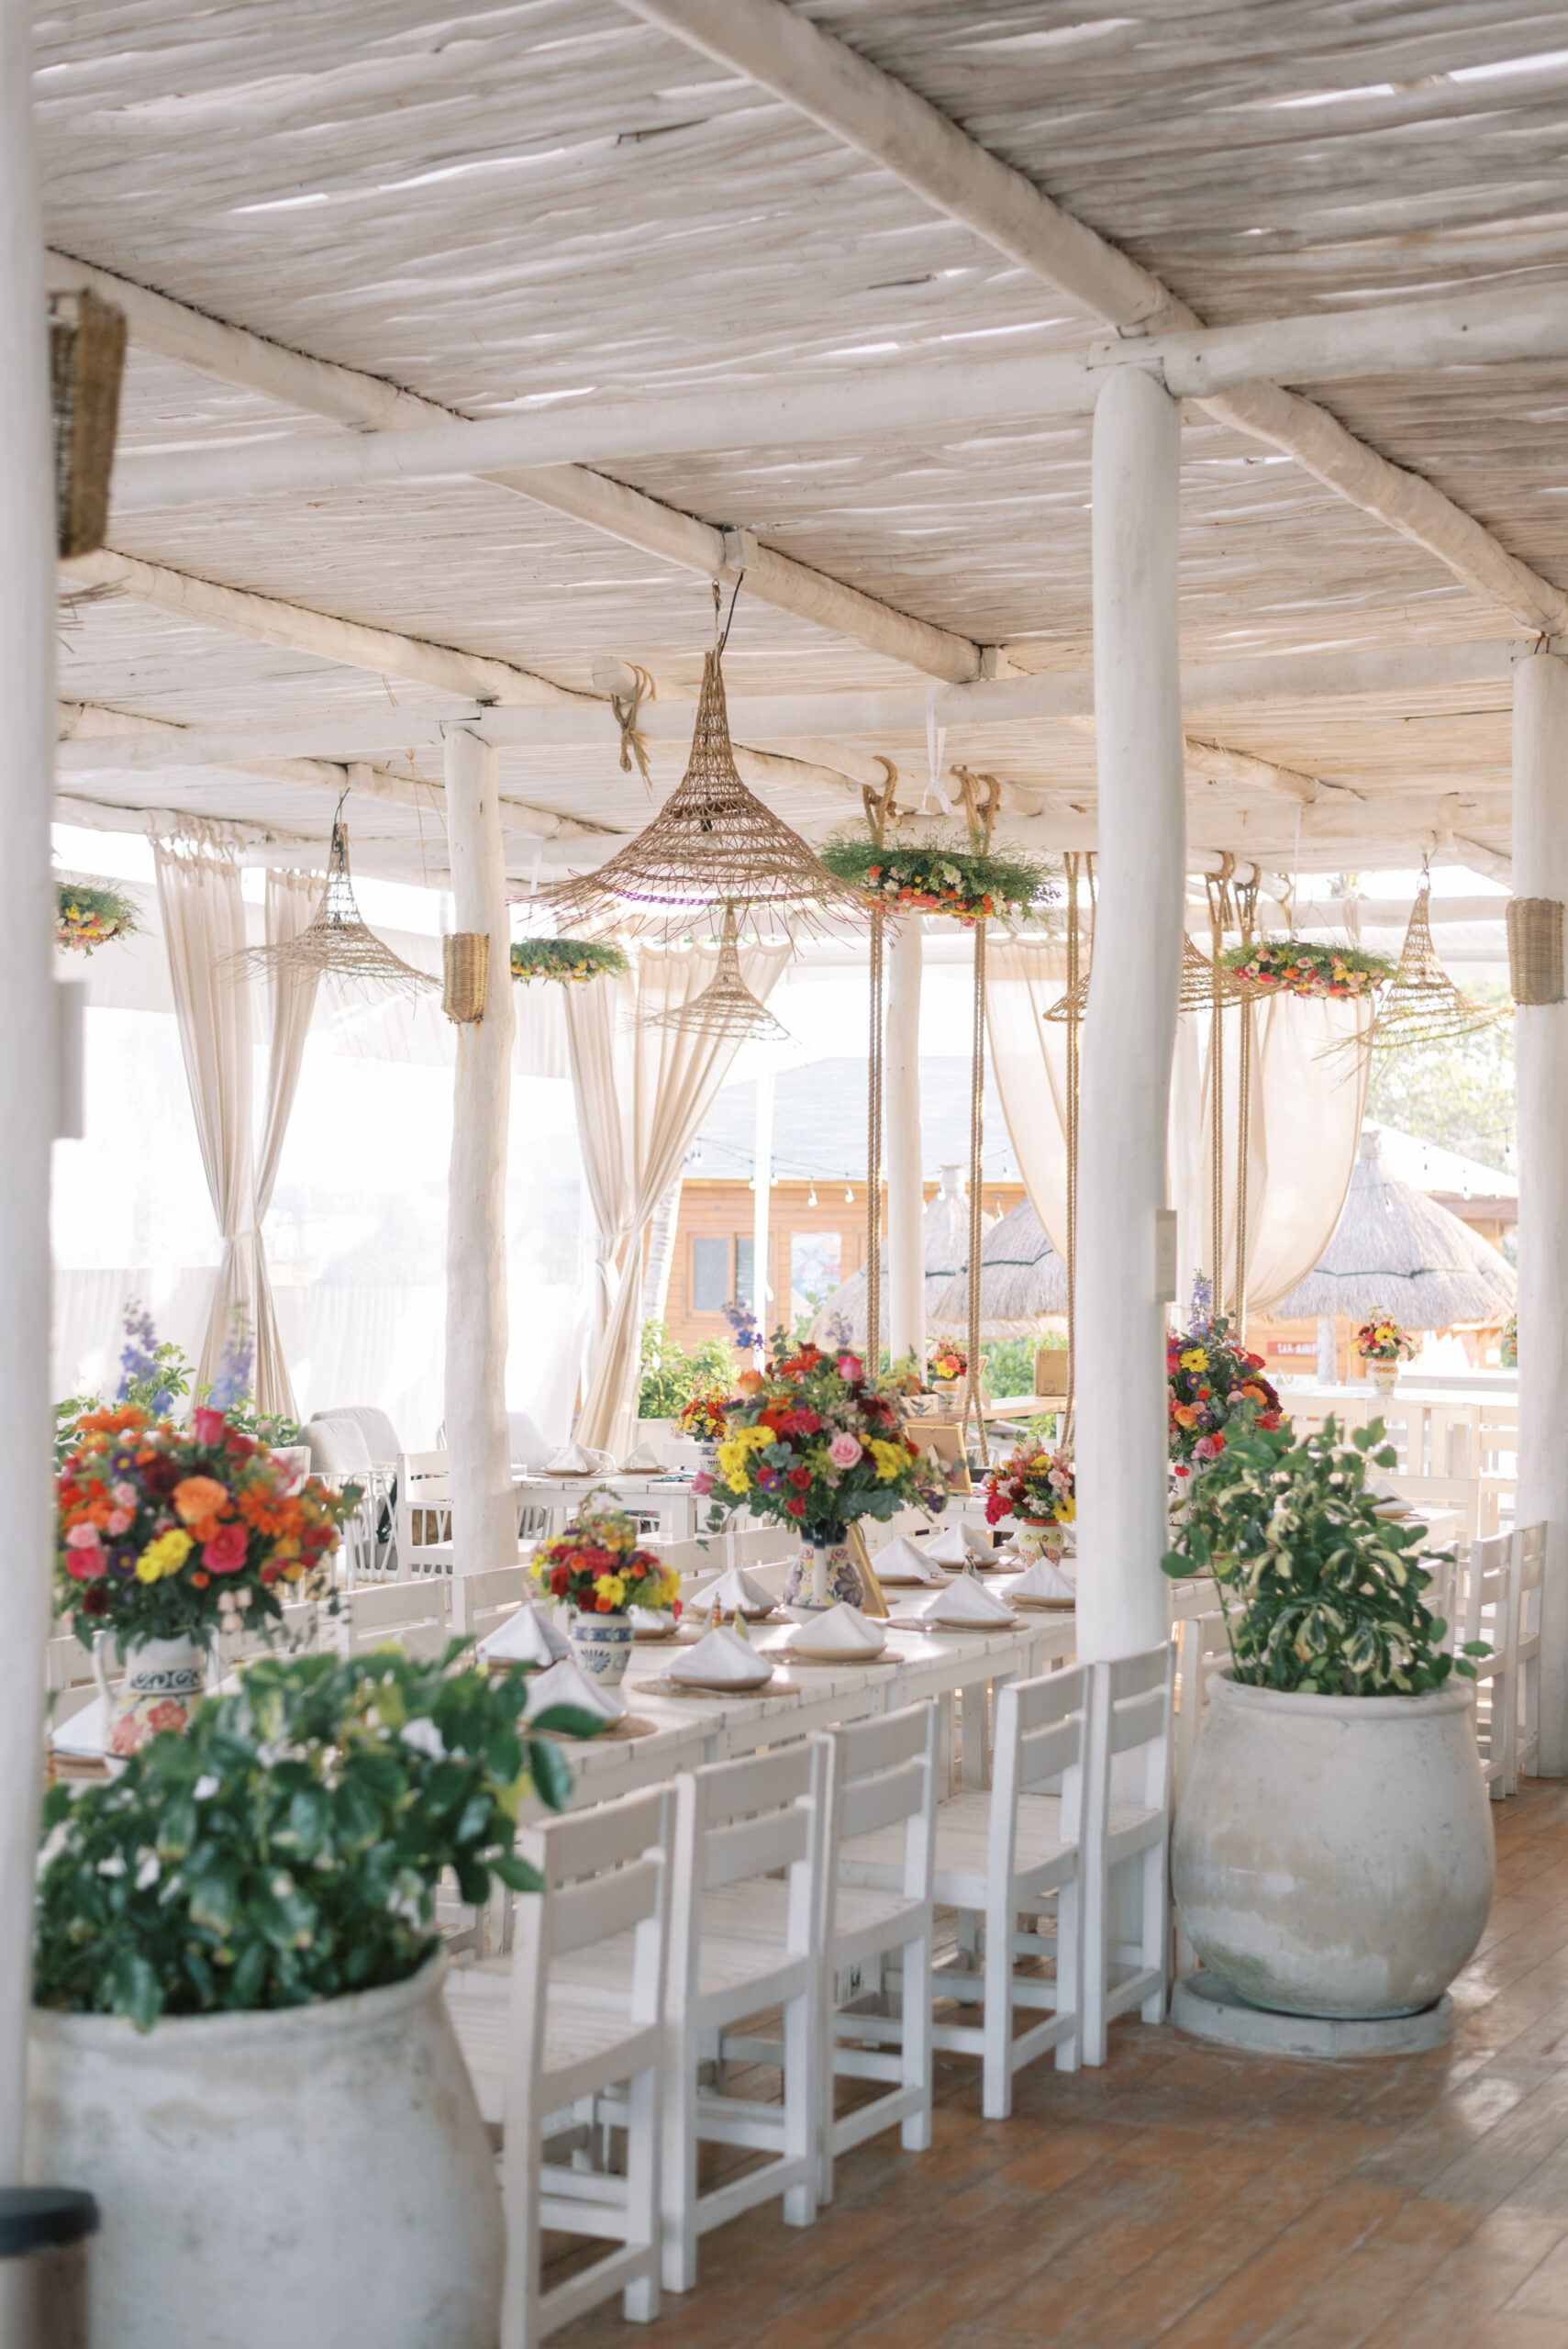 A beachside rehearsal dinner setup at a white and driftwood terrace in Akumal, Mexico. Colorful flowers and traditional Mexican pottery adorn the table as guests gather around to celebrate. The turquoise waters of the Caribbean sea provide a stunning backdrop. This photograph was captured by destination wedding photographer Kelsey Halm.